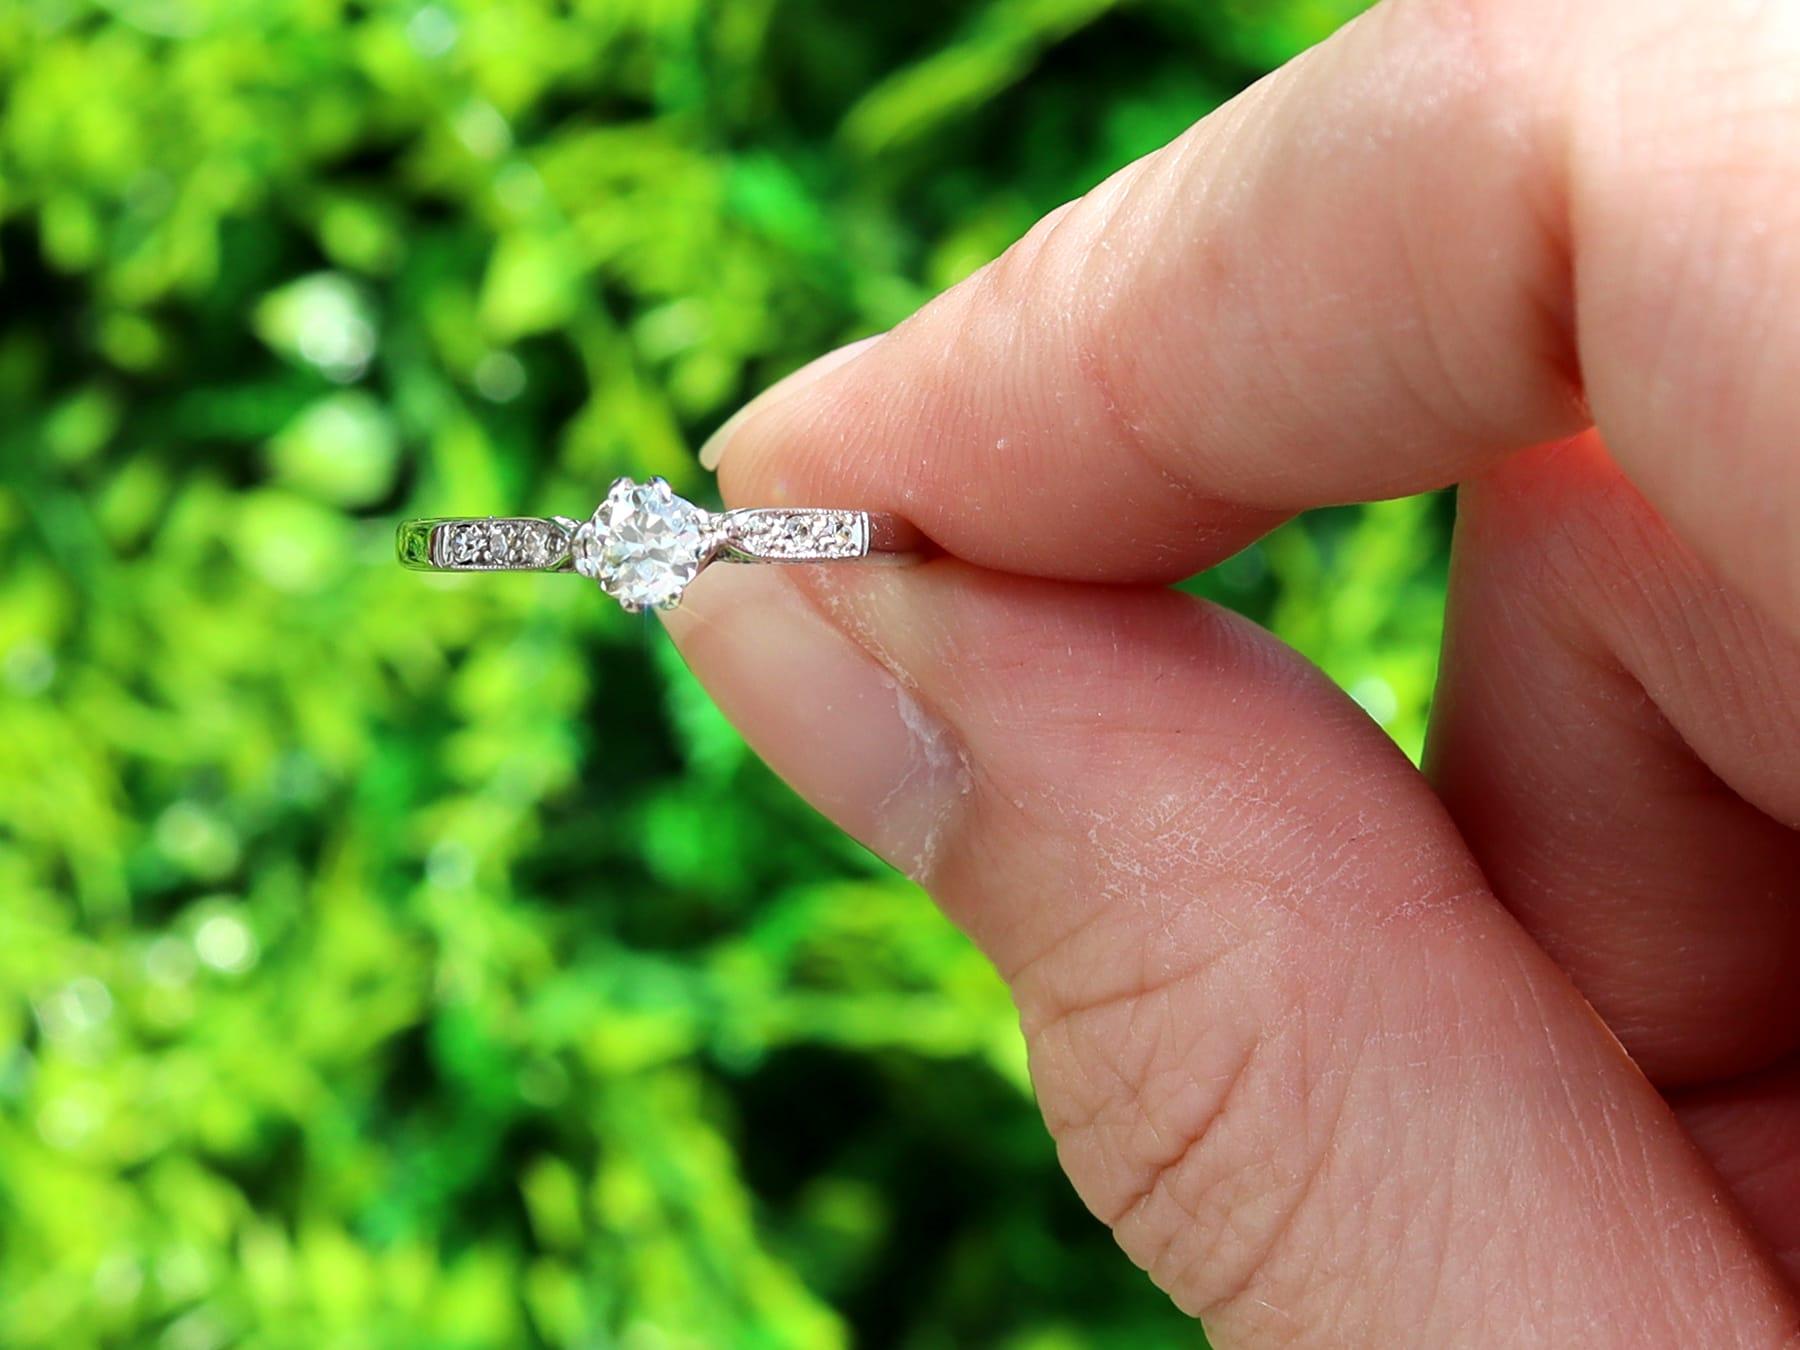 A fine vintage 0.22 carat diamond solitaire ring crafted in contemporary 18 karat white gold with a platinum setting; part of our diamond jewellery collections.

This fine vintage diamond solitaire has been crafted in 18k white gold with a platinum